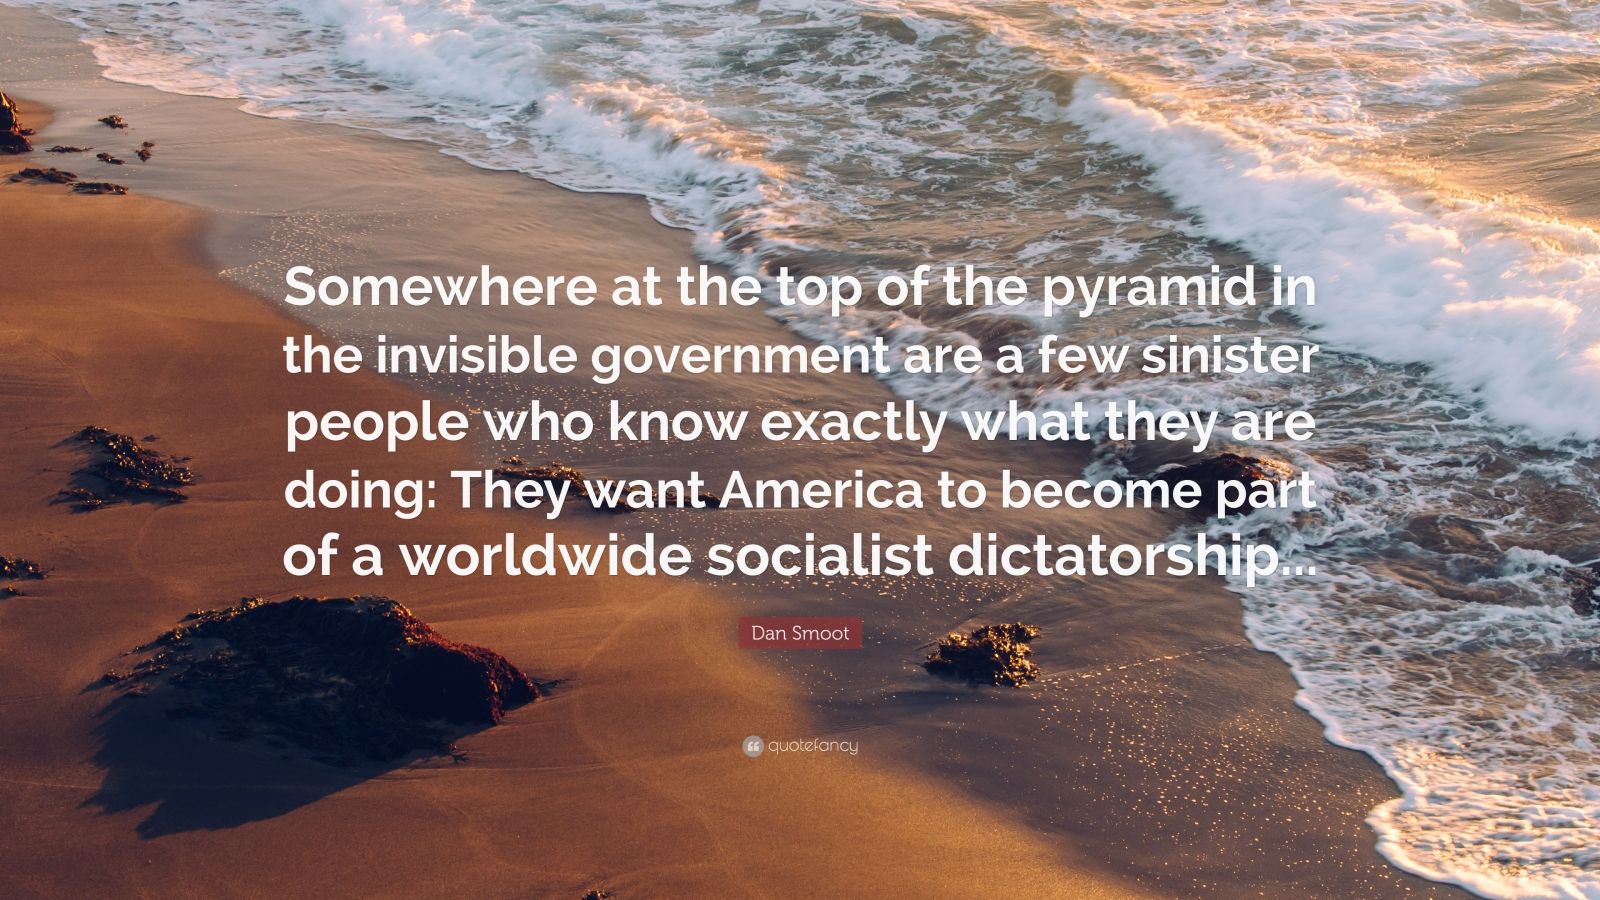 Dan Smoot Quote: "Somewhere at the top of the pyramid in the invisible government are a few ...